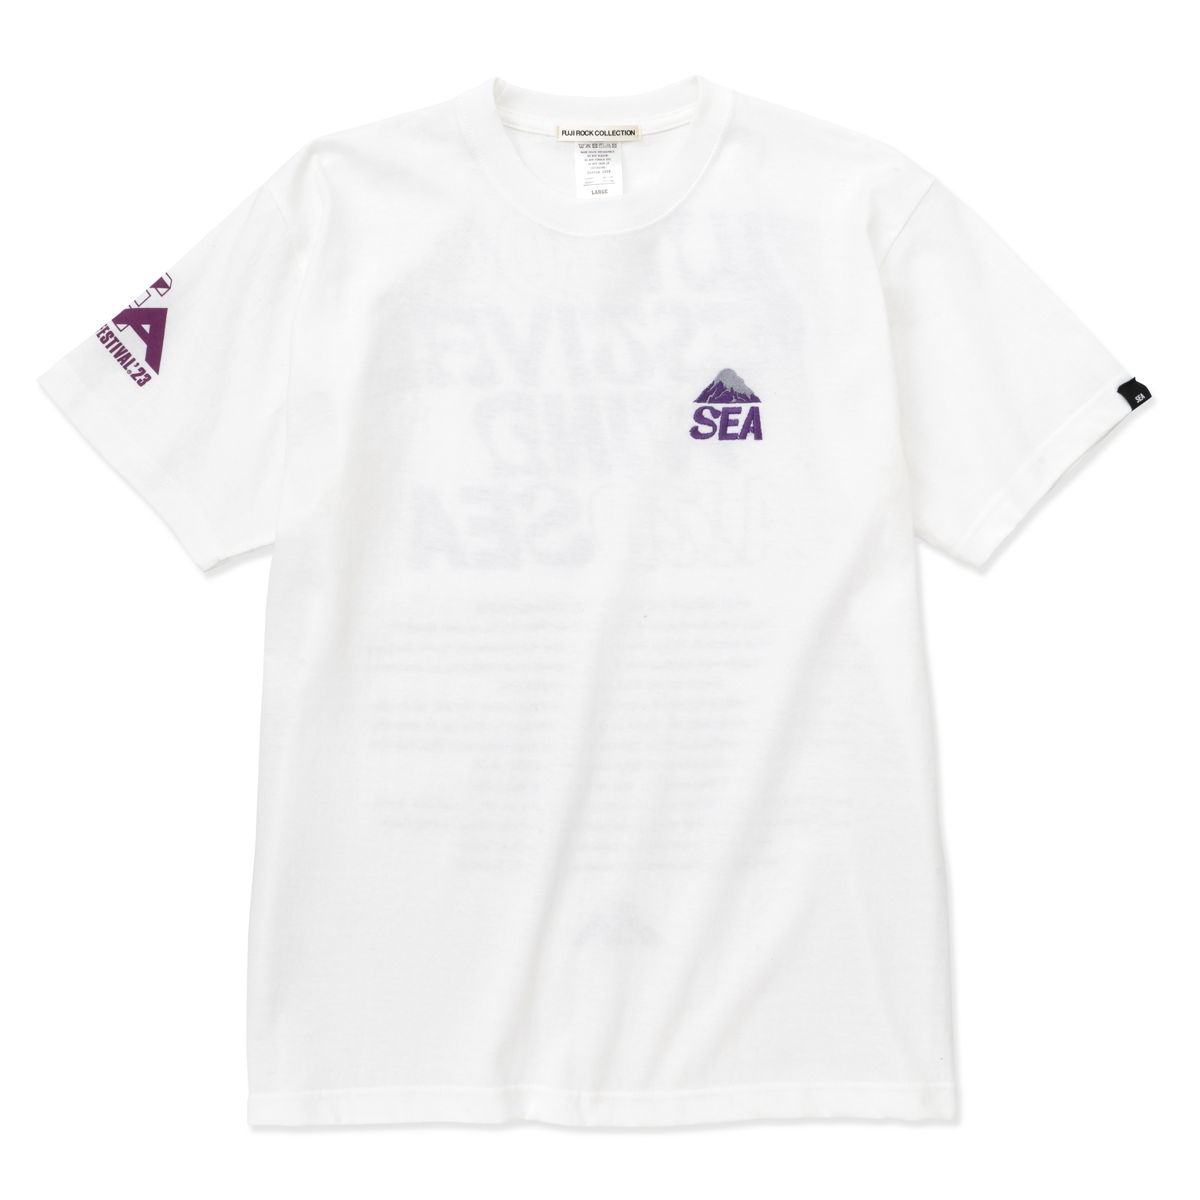 WIND AND SEA FRF S/S TEE WHITE